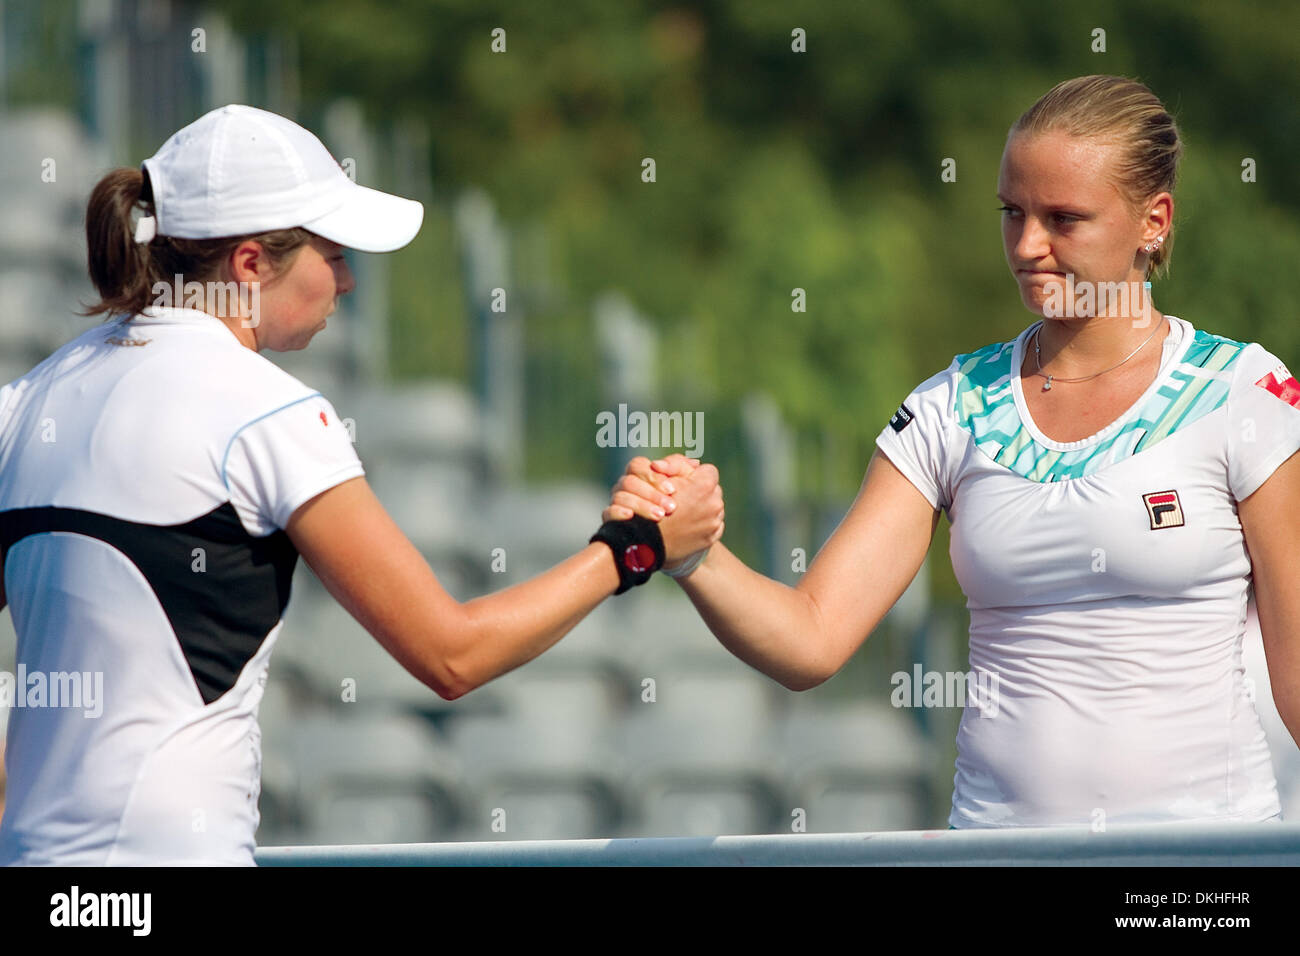 Agnes Szavay of Hungary (right) and Valerie Tetreault of Canada shake hands after their match. Szavay battled to come out on top, winning (Credit Image: © Terry Ting/Southcreek Global/ZUMApress.com) Stock Photo